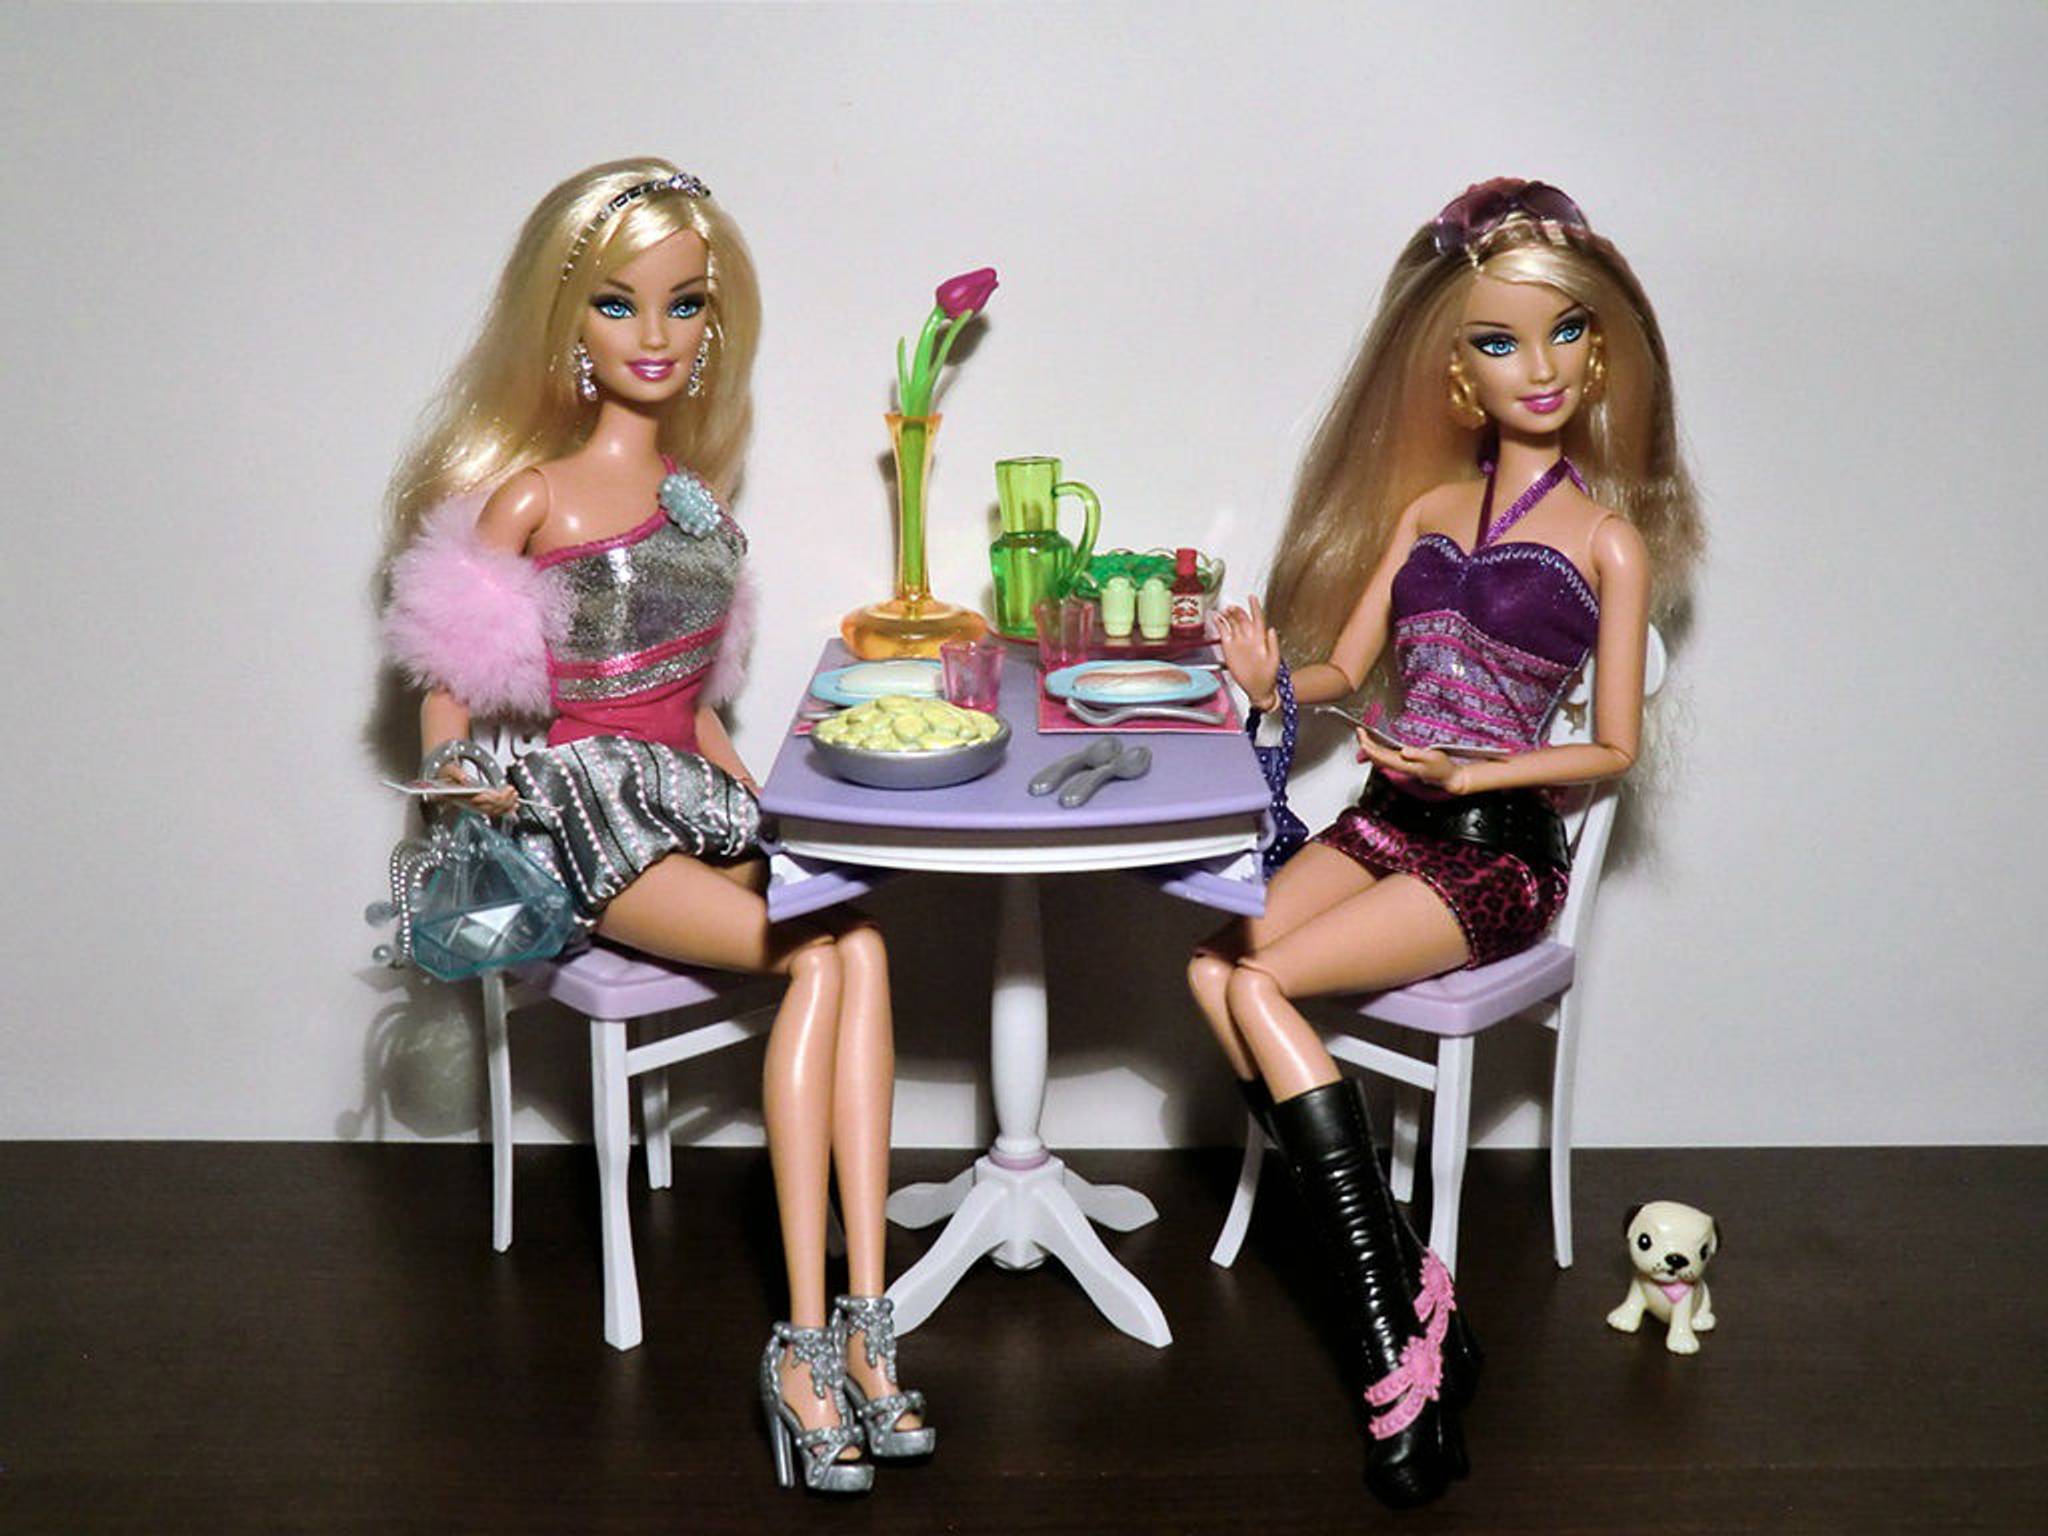 Is Barbie’s reign really over?